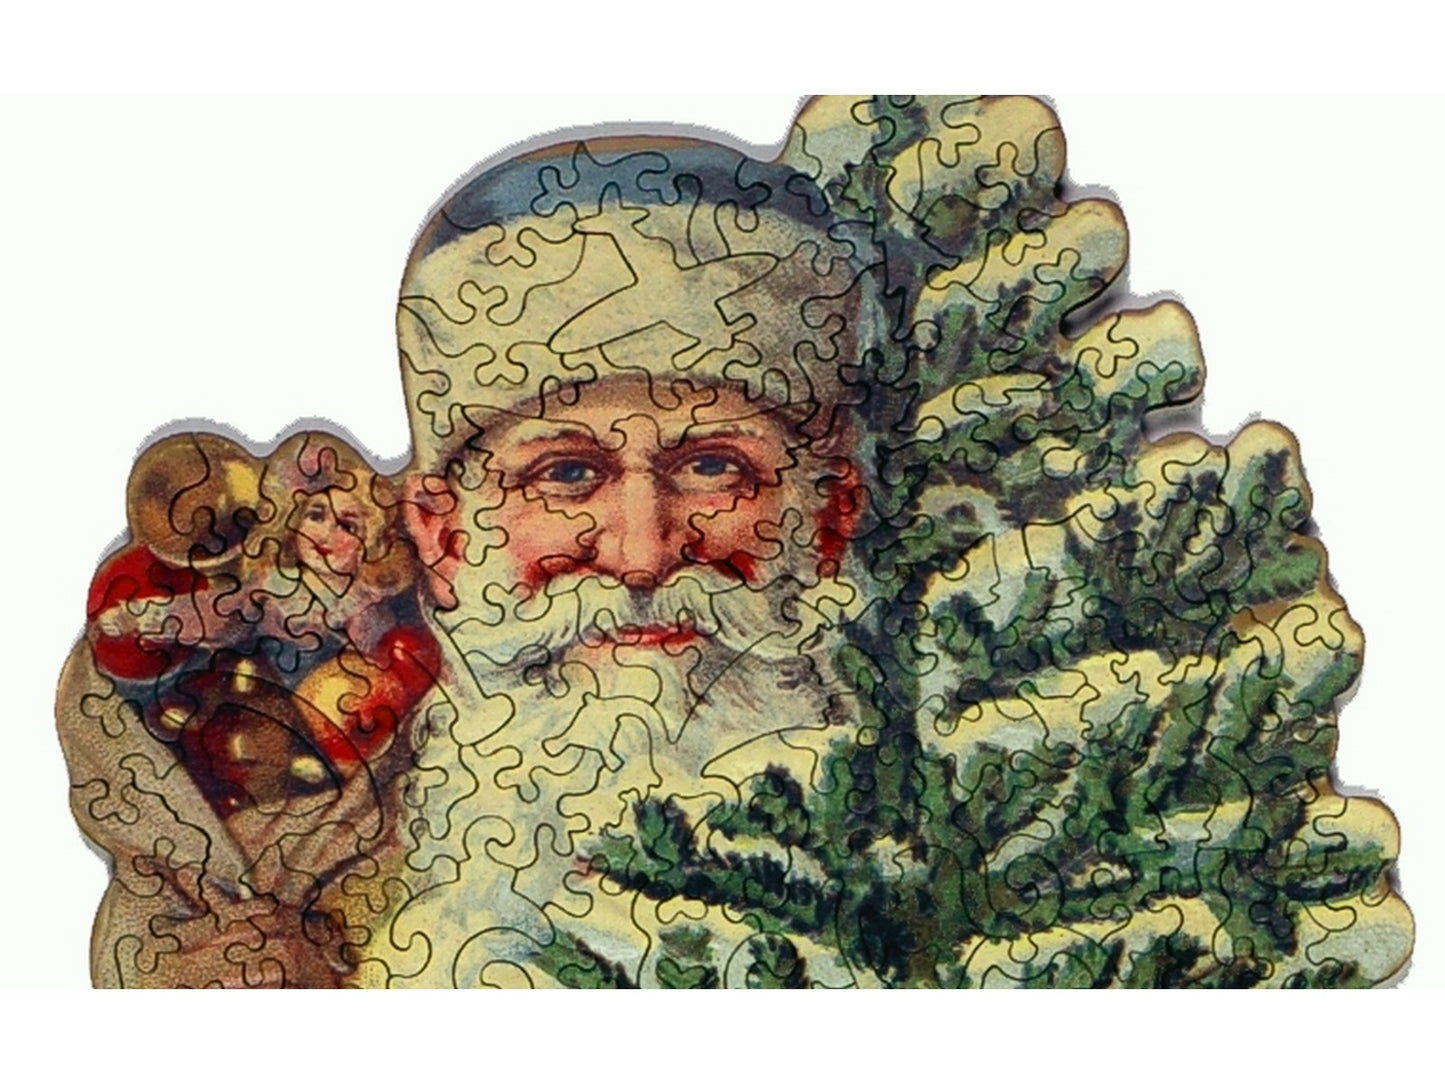 A closeup of the front of the puzzle, Joyful Yellow Santa.